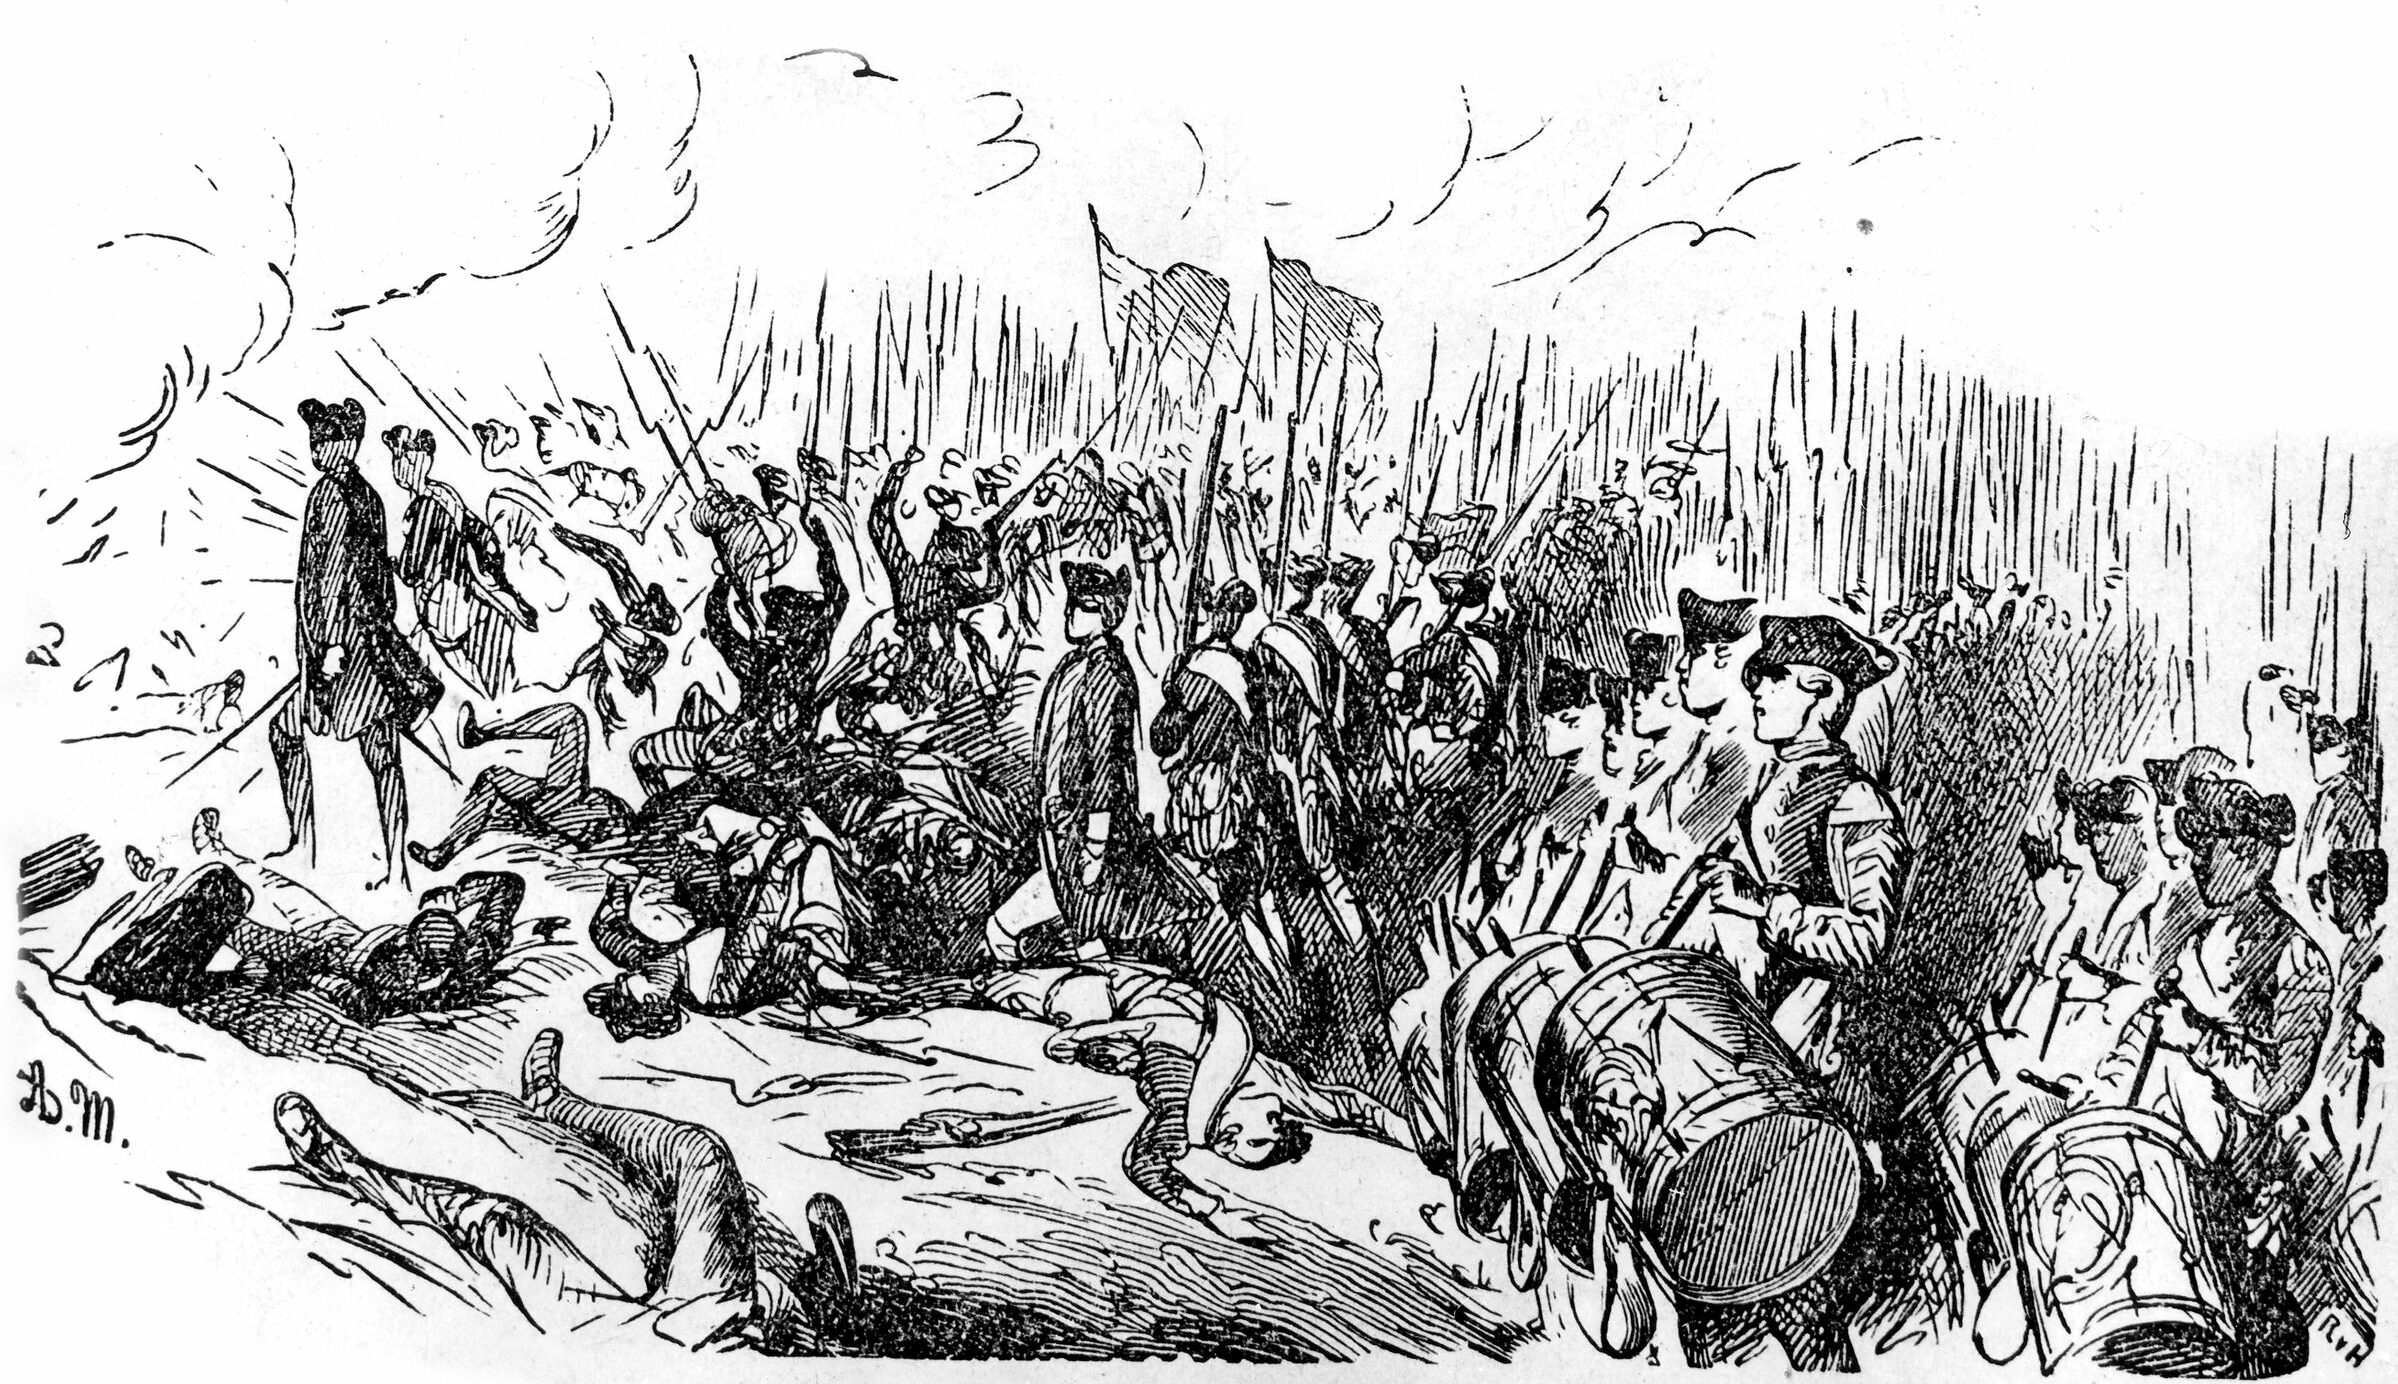 At Kolin, Daun’s well-handled Austrian troops beat back repeated Prussian attempts to outflank them. An assault on the Austrian center, led by Prince Moritz Furst Anhalt-Dessau, also failed.